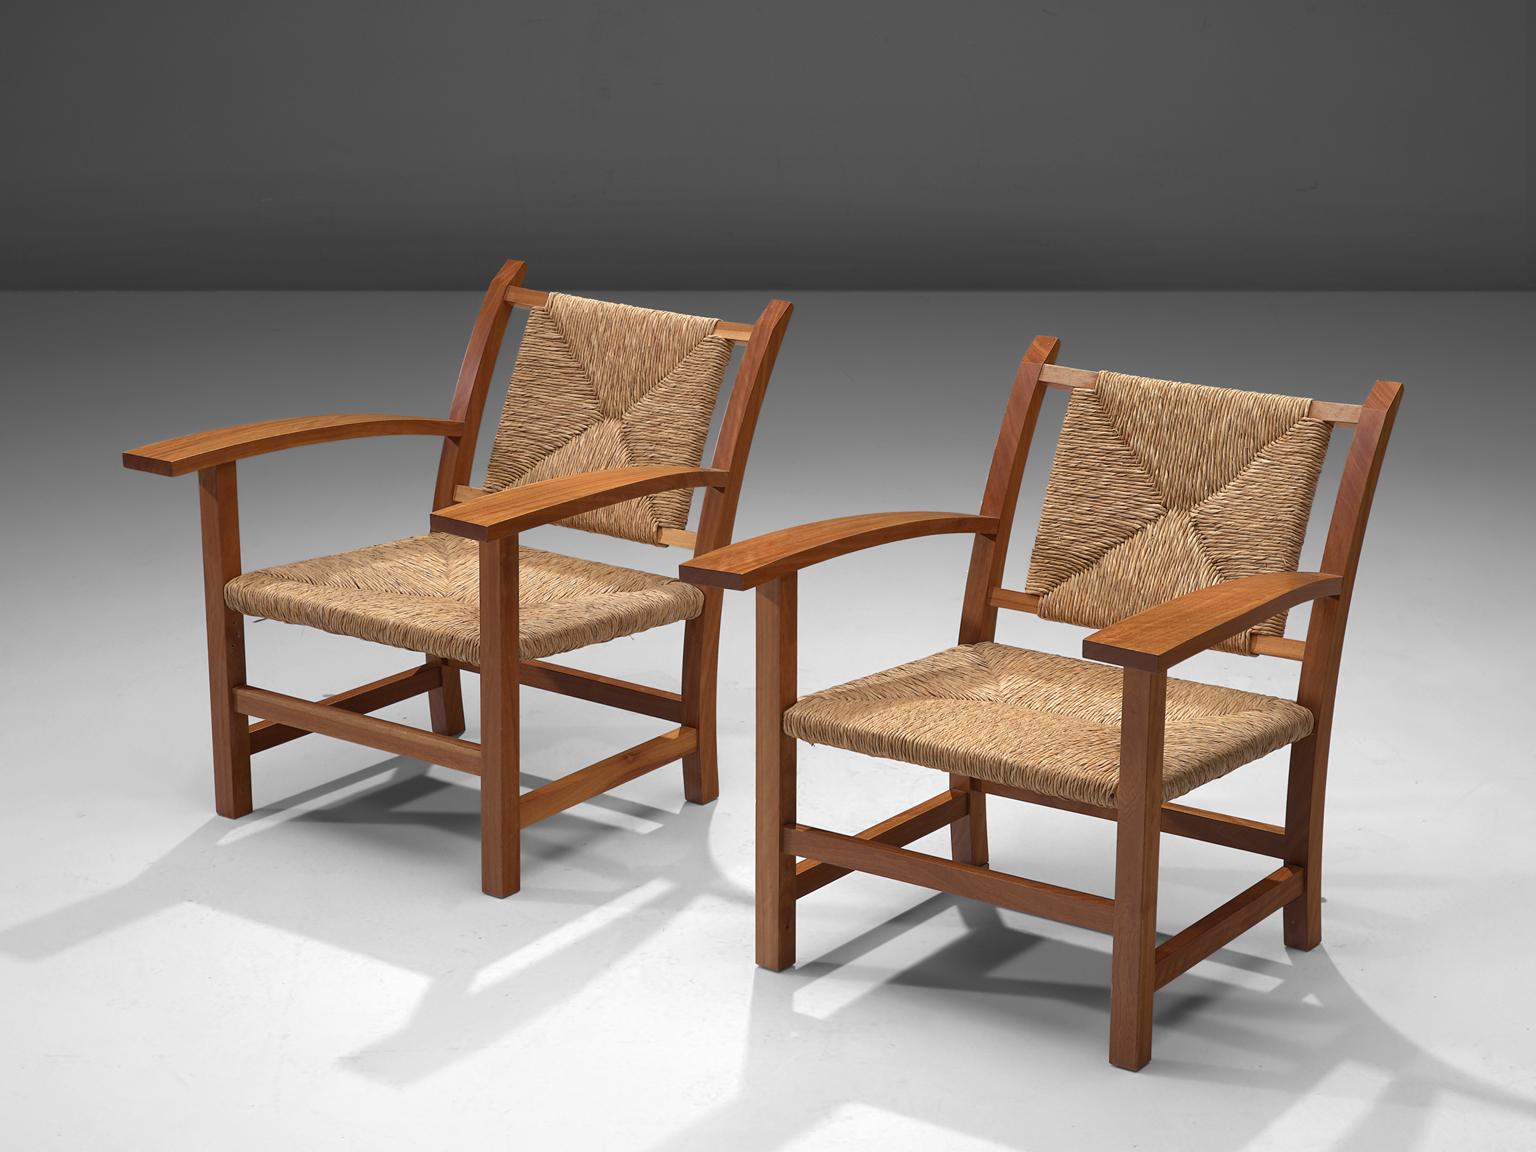 Josep Torres Clave, set of 2 armchairs, oak and cane, Spain, 1950s. 

This set of armchairs by Josep Torres Clave have an oak frame and its seat and back upholstered in woven cane. The design is functionalistic, yet rustic. The armrests are slightly